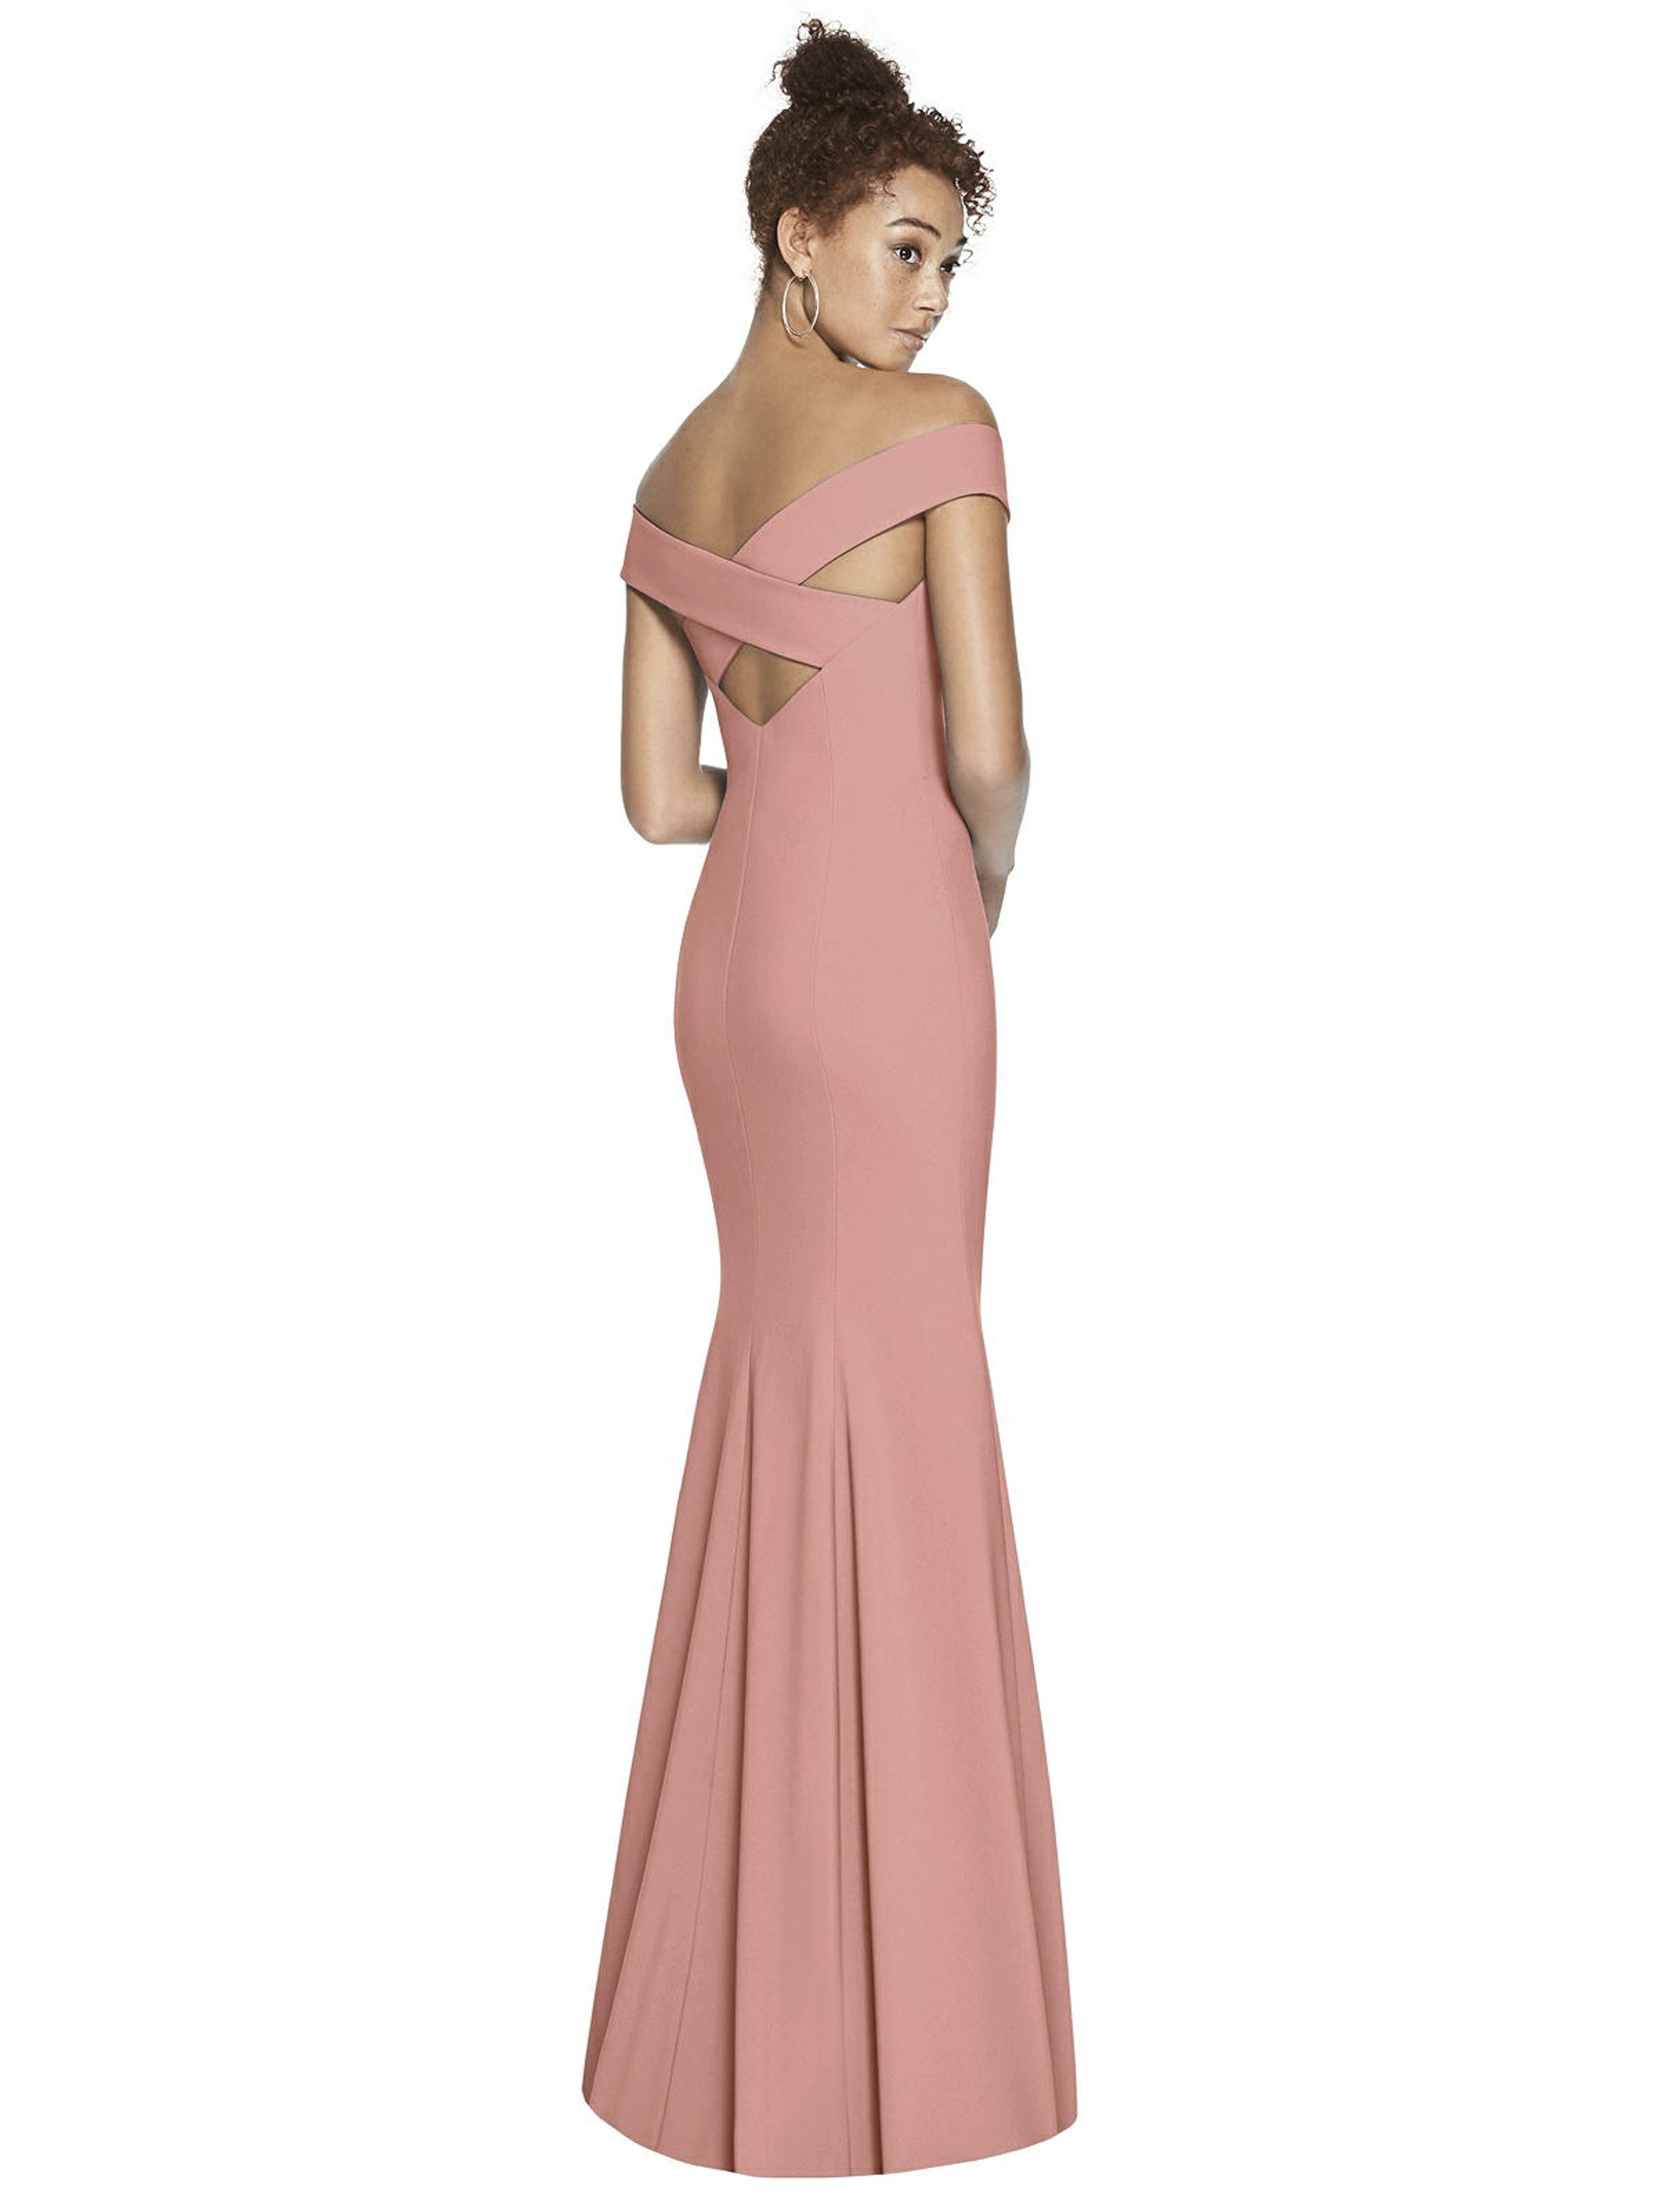 DESSY COLLECTION DESSY COLLECTION OFF-THE-SHOULDER CRISS CROSS BACK TRUMPET GOWN